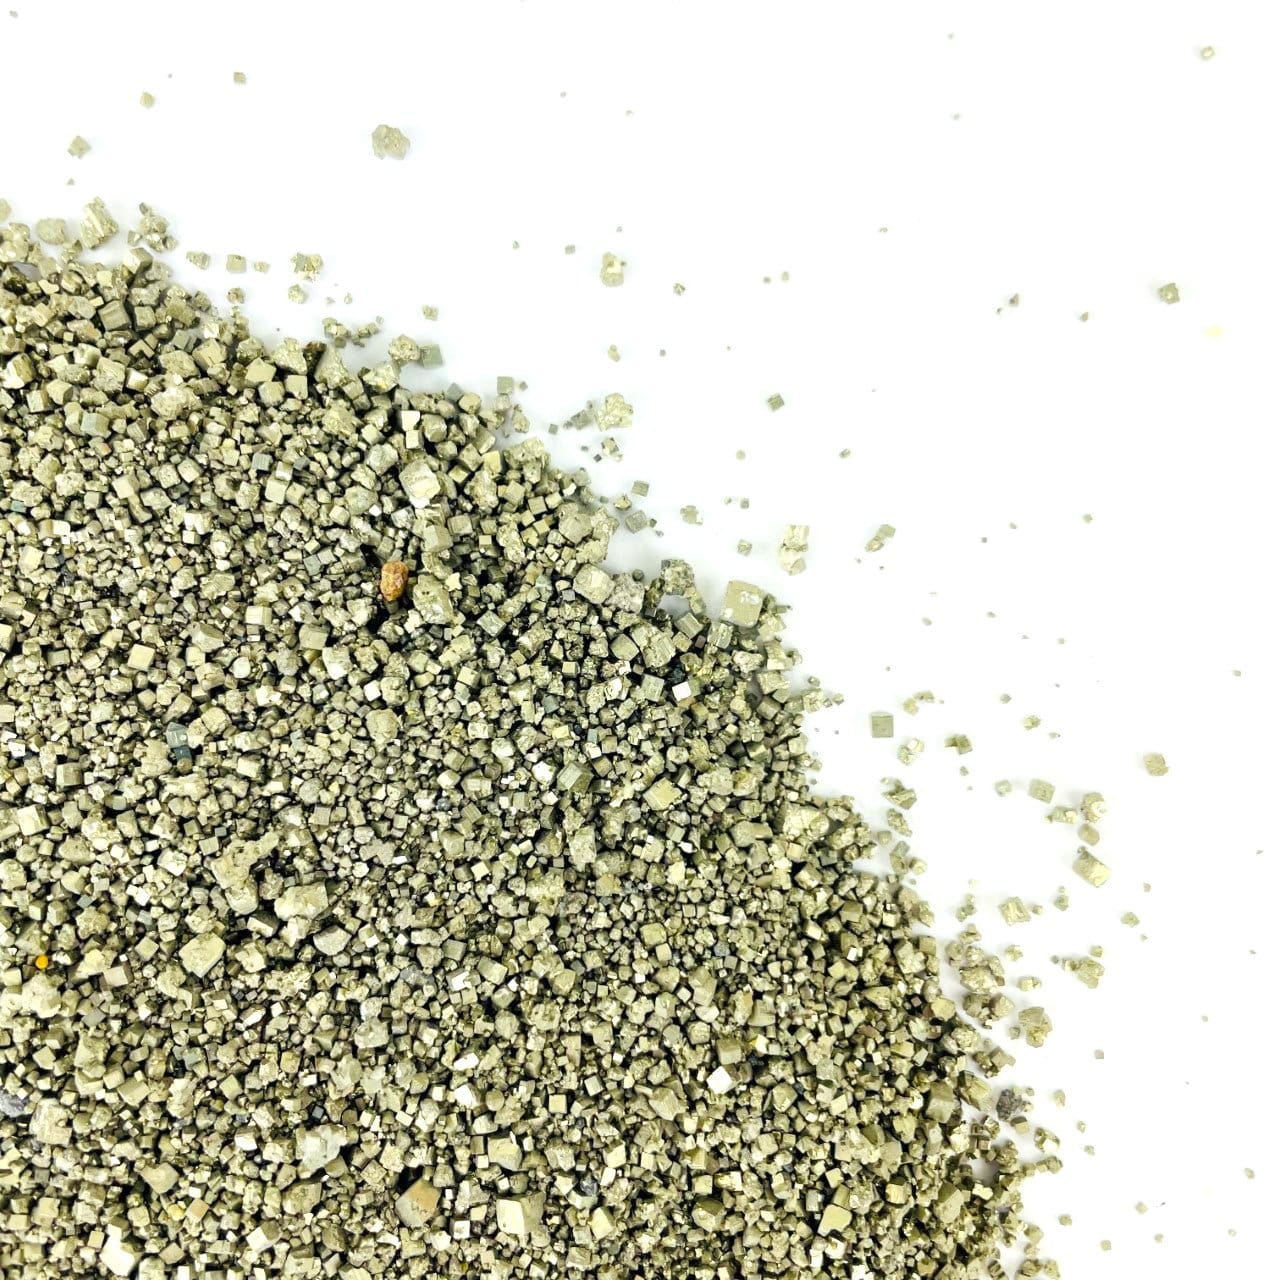 Pyrite Dust displayed on a white surface.